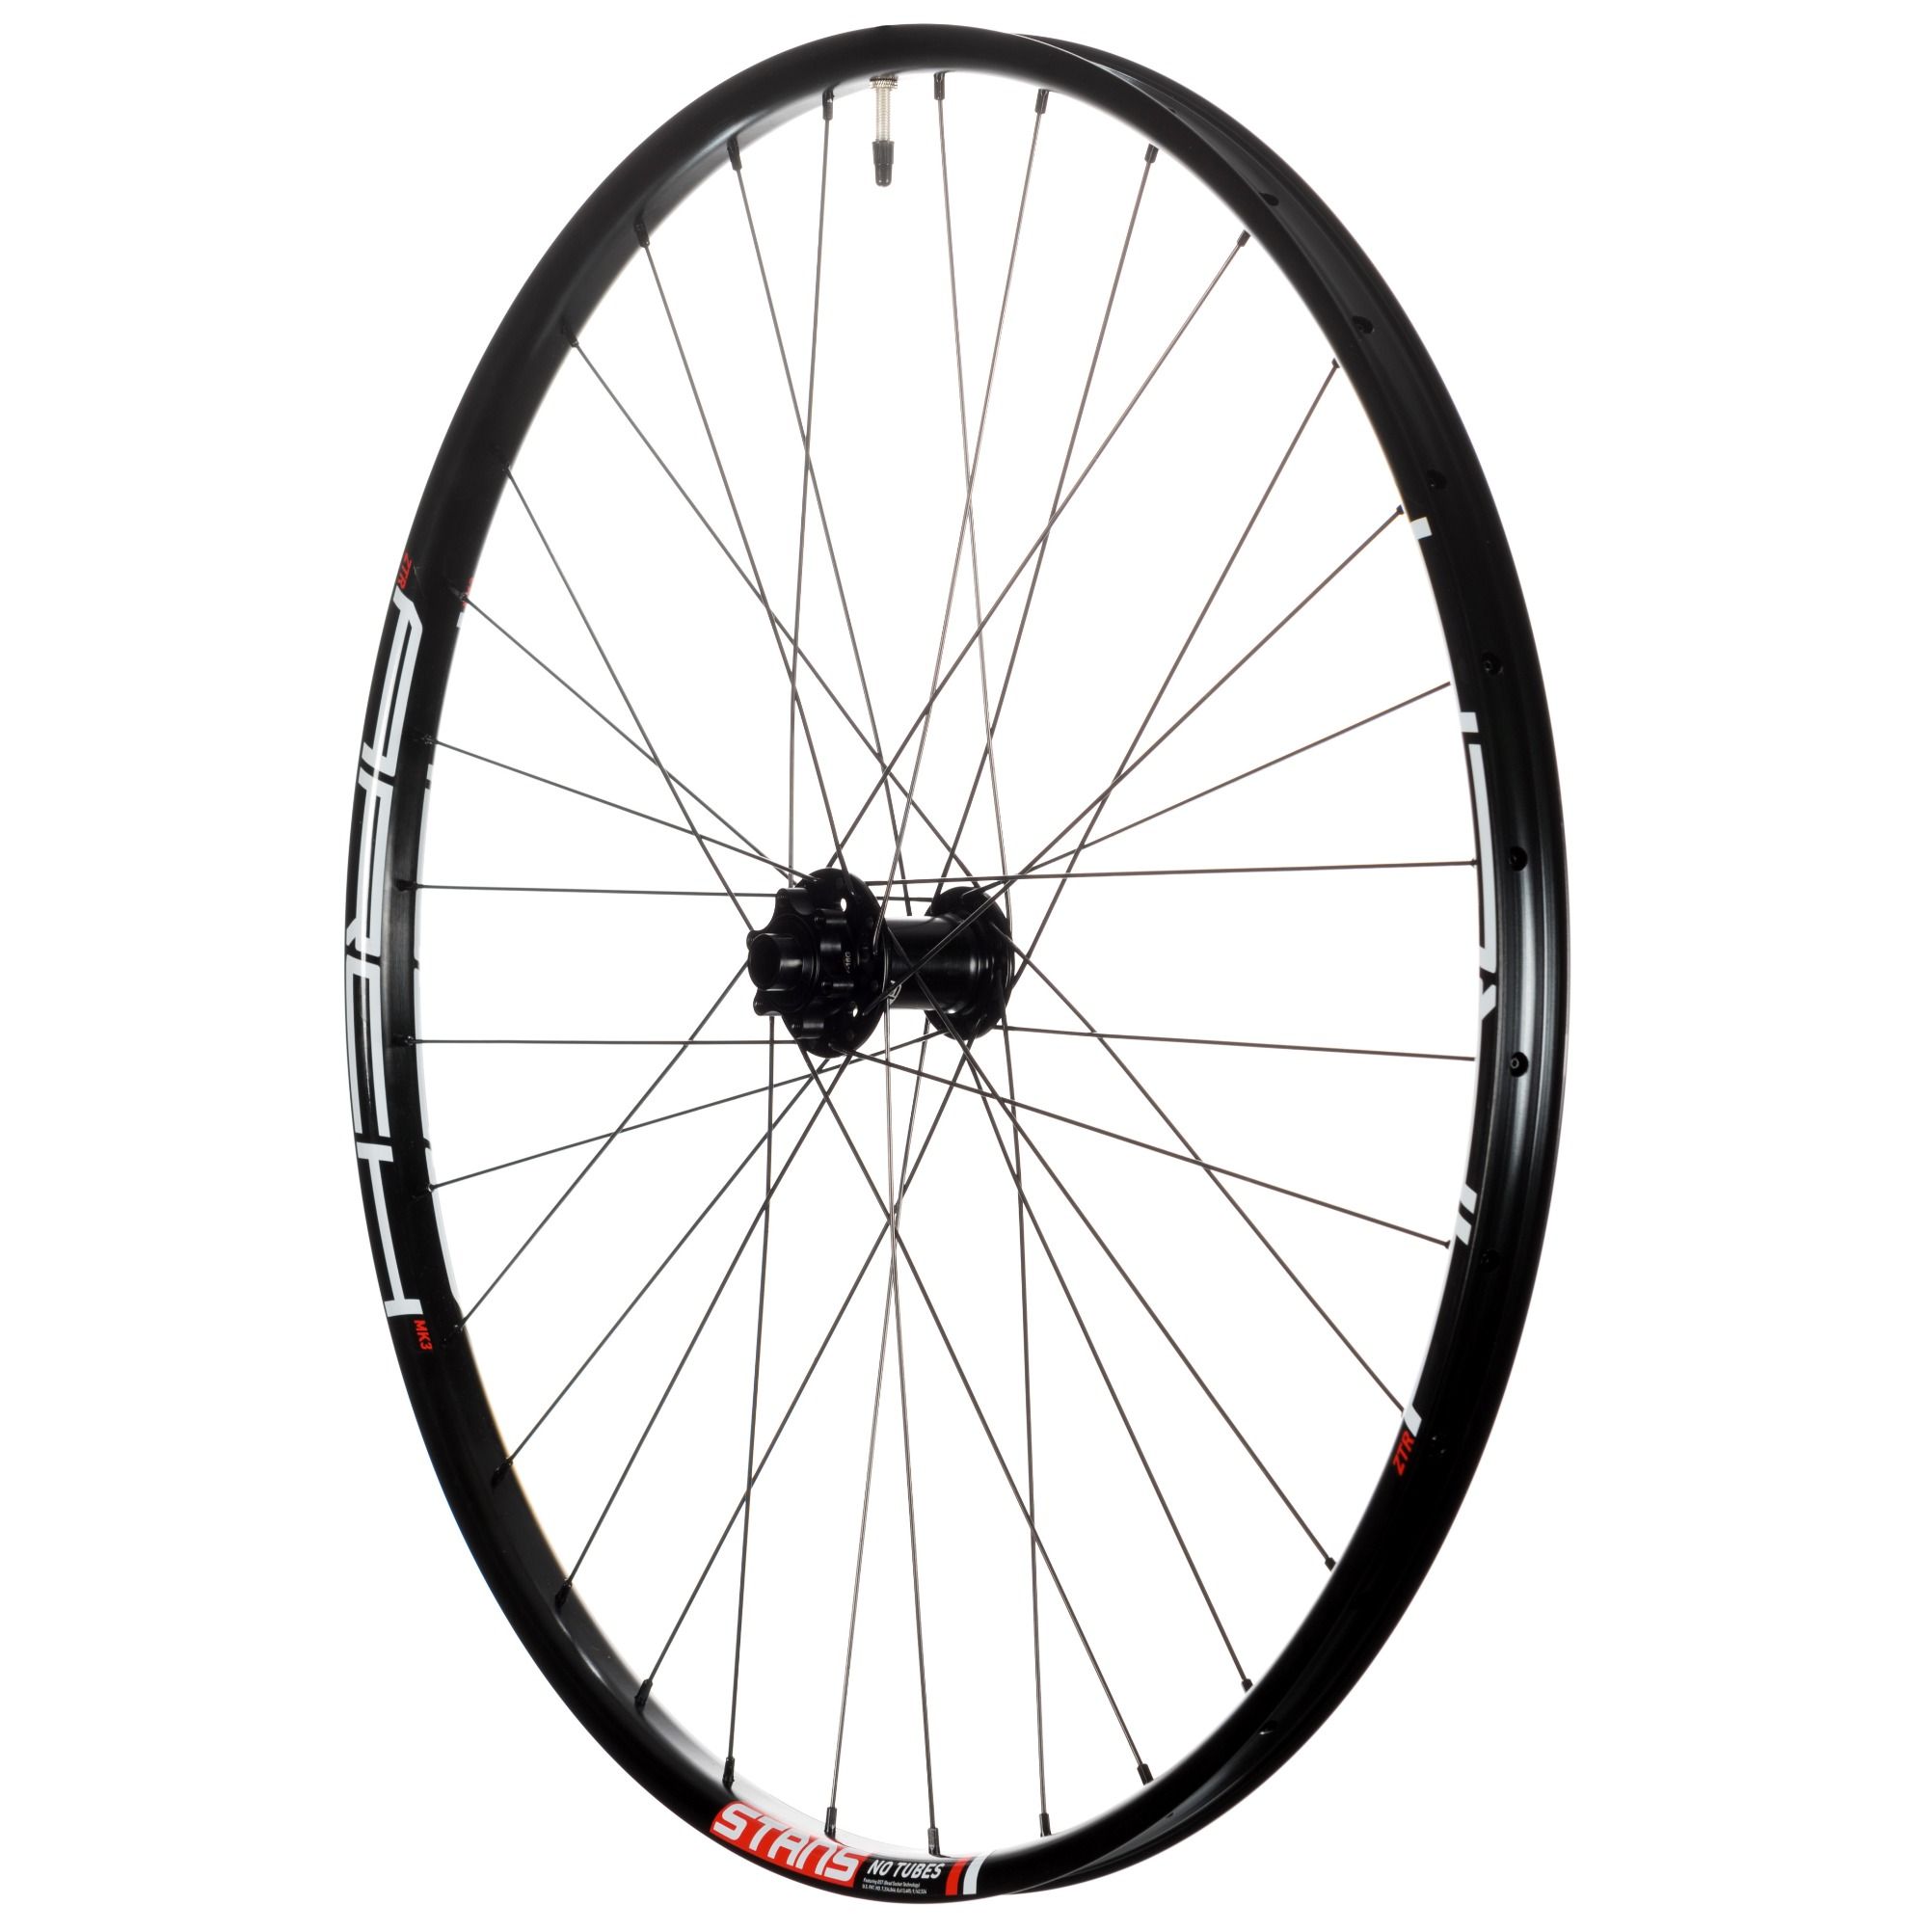 Stans Arch Rims | MK3 Trail ready for 2.25 - 2.5 tyres by STRADA